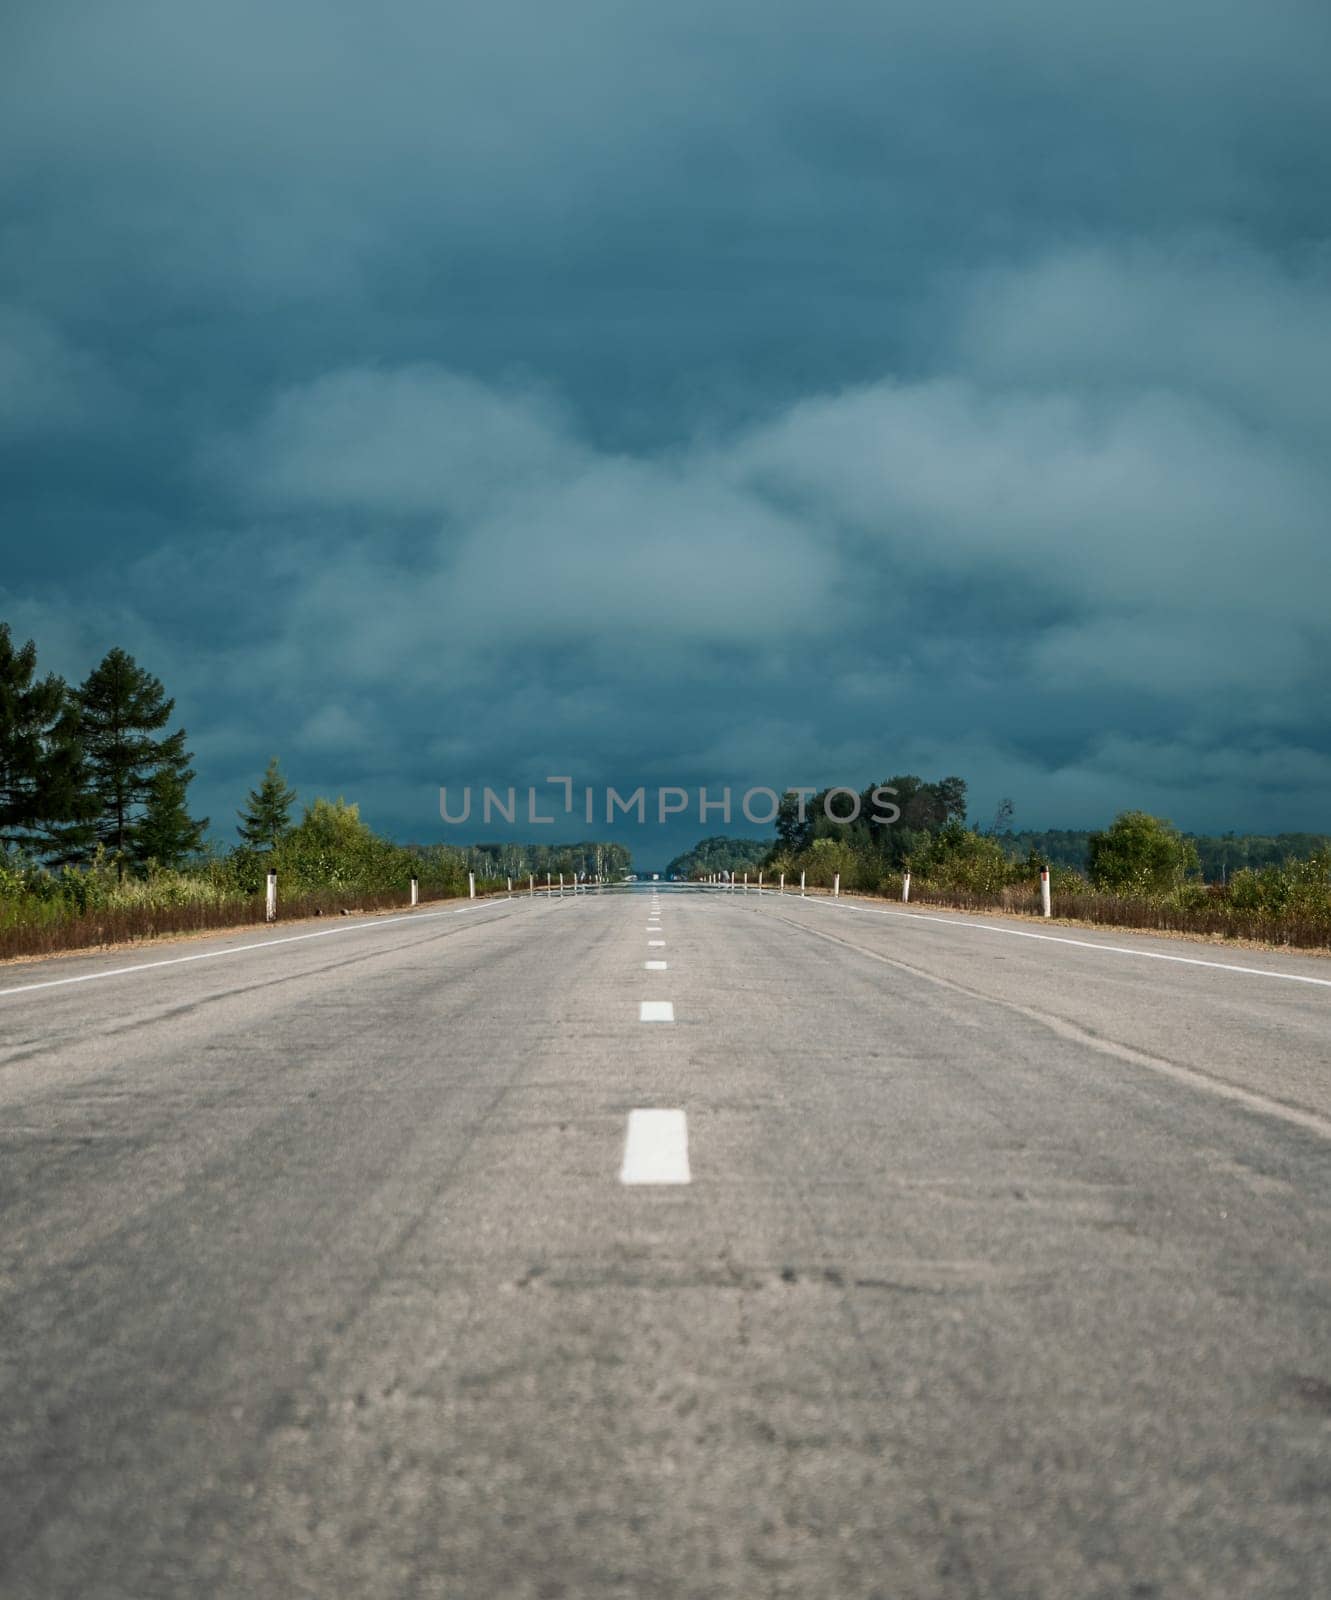 A long, straight highway stretches into the distance toward a dense forest under a cloudy sky.